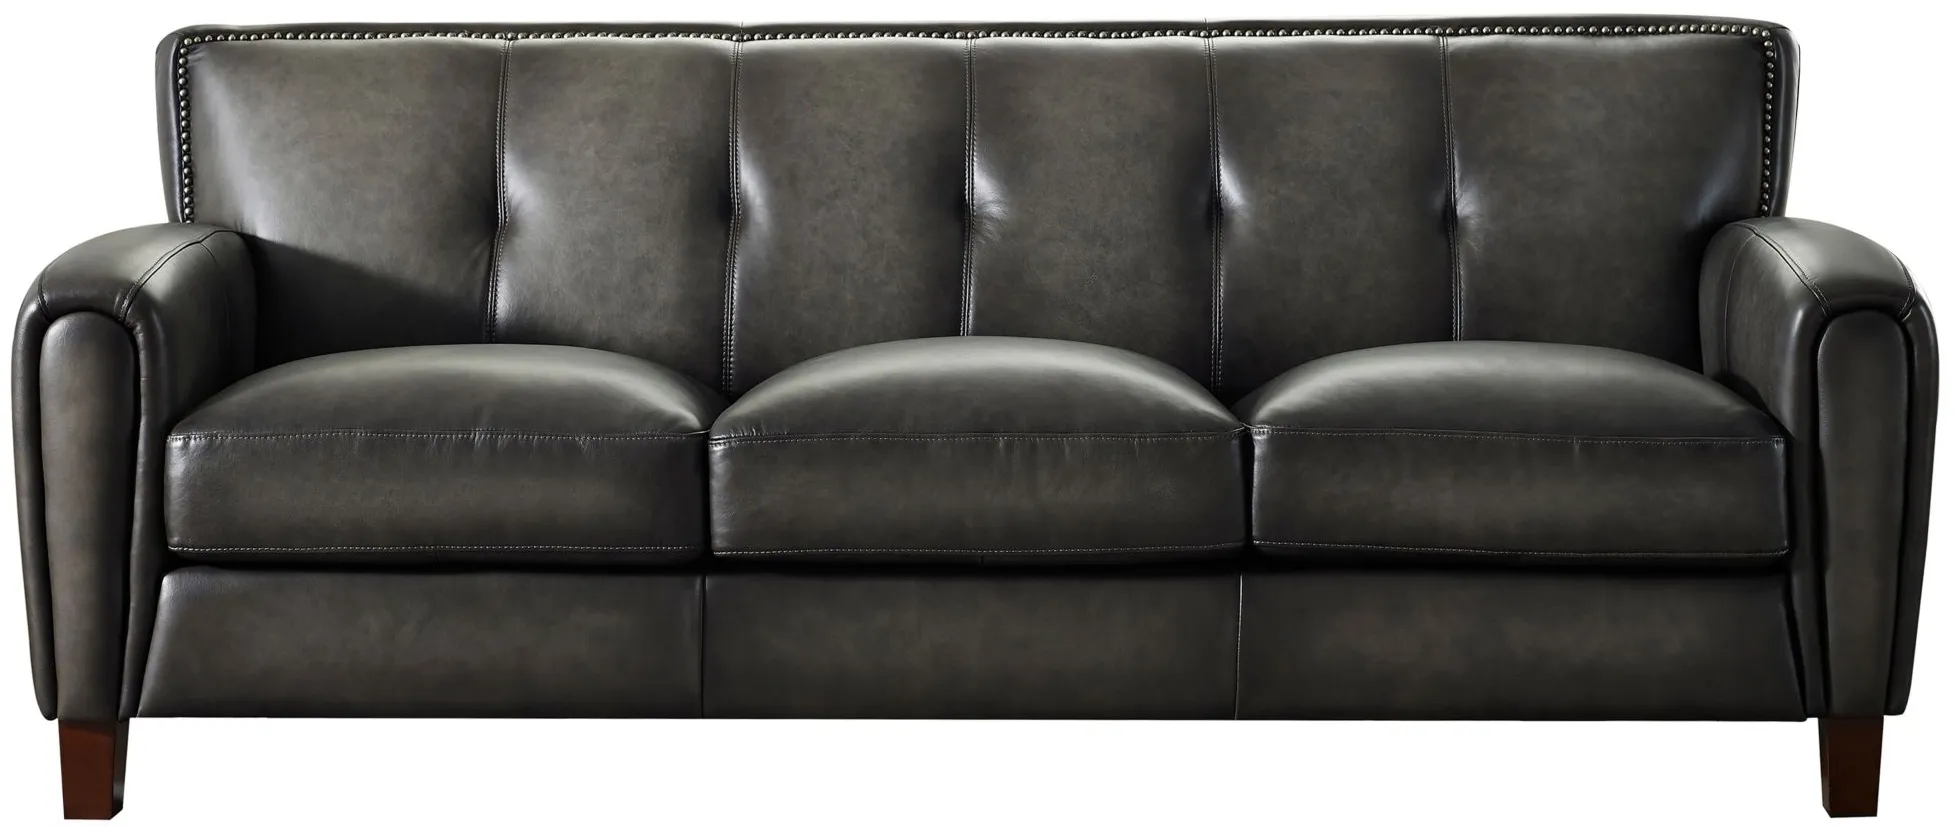 Savannah Leather Sofa in Ash Gray by Amax Leather